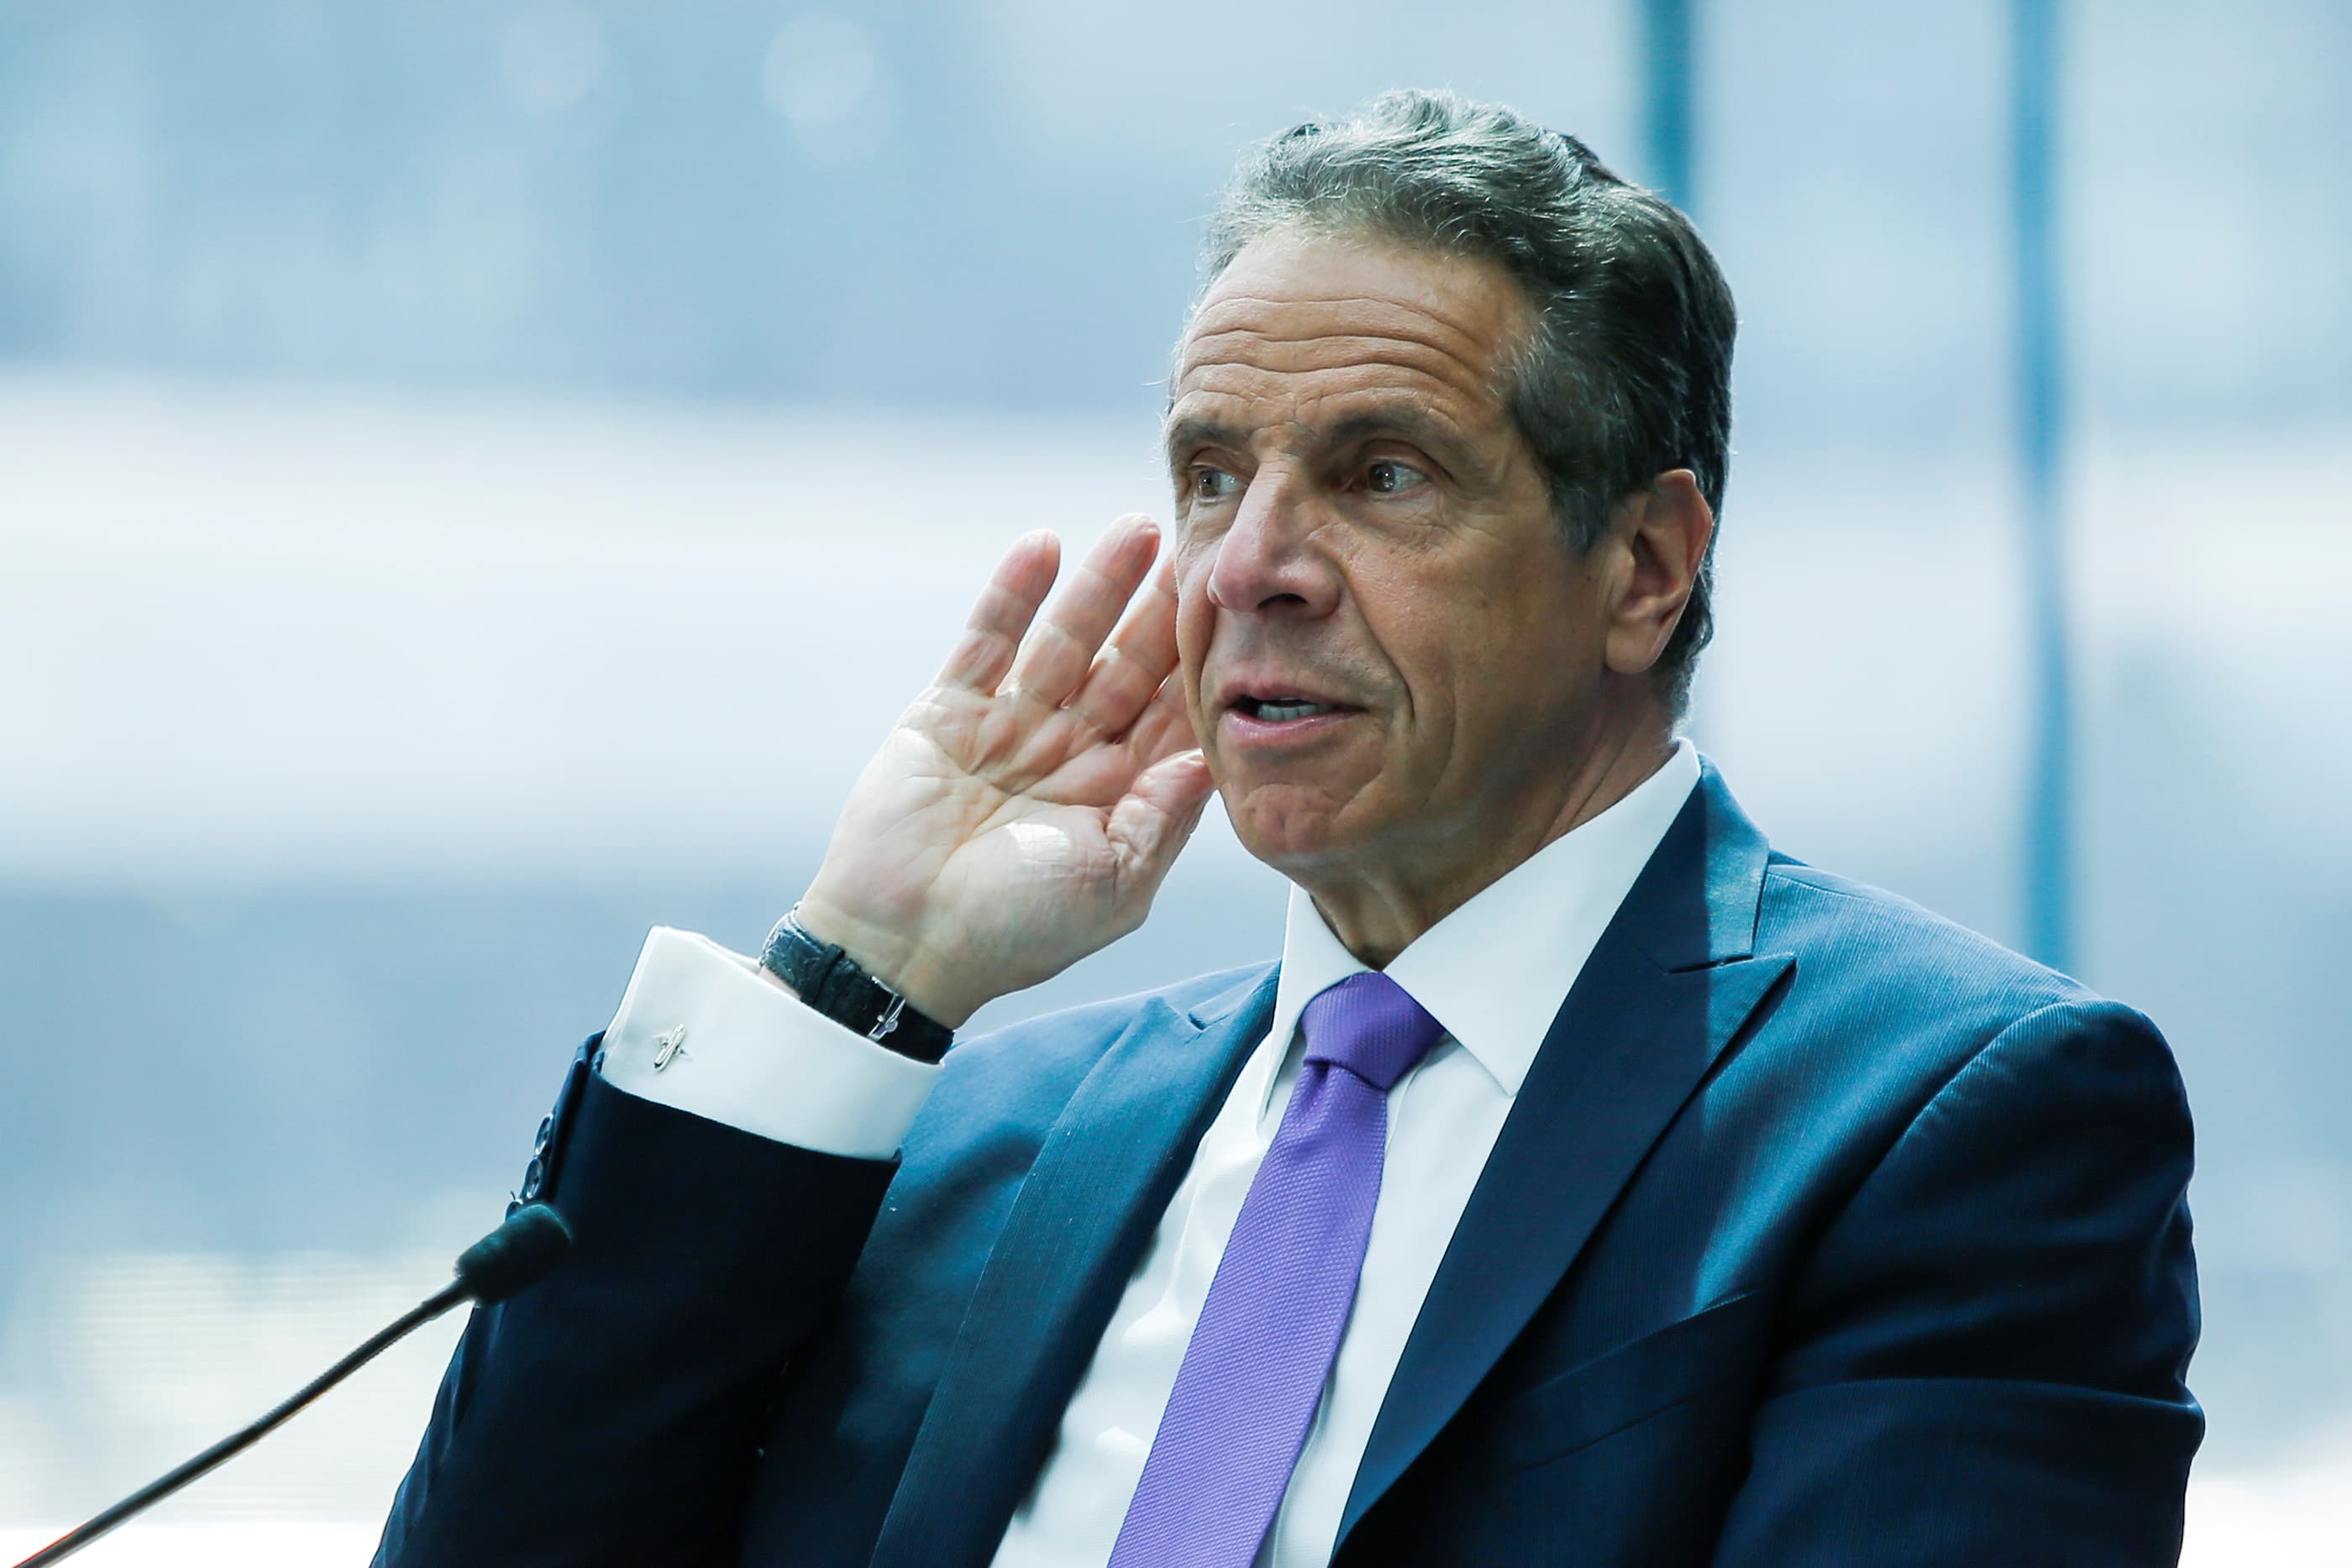 New York Assembly will suspend Andrew Cuomo impeachment investigation after governor resigns